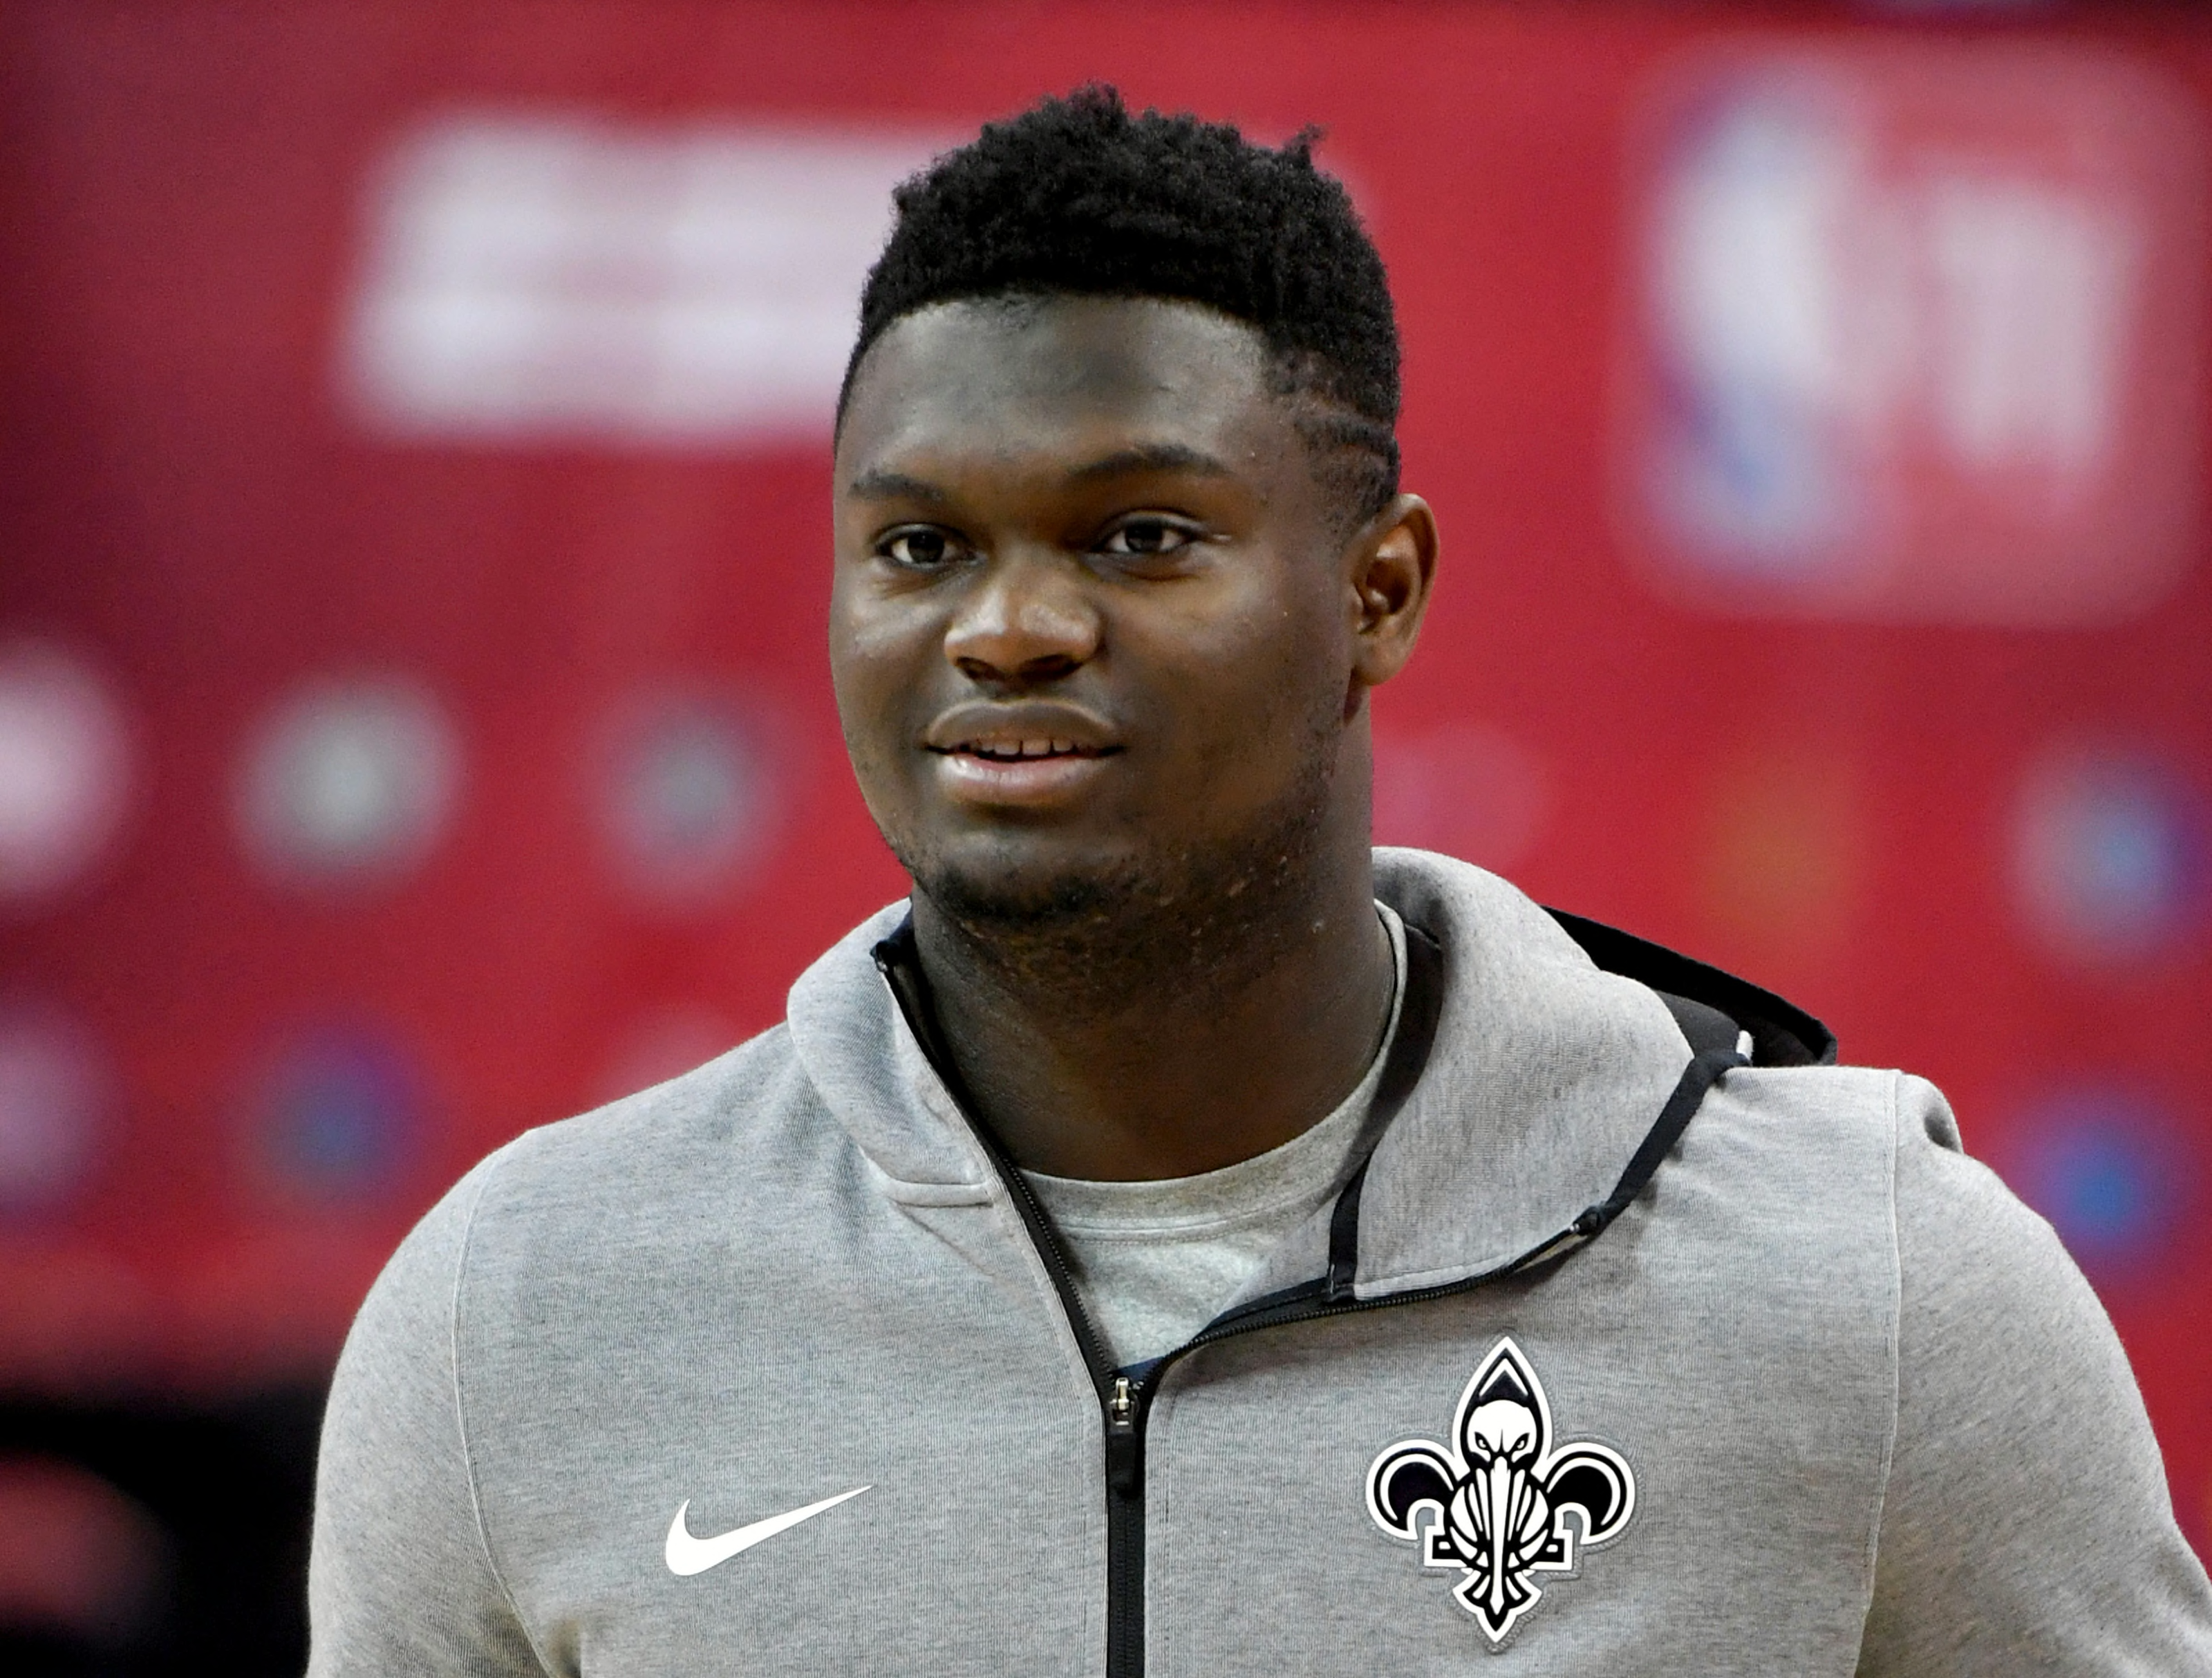 zion signed with jordan